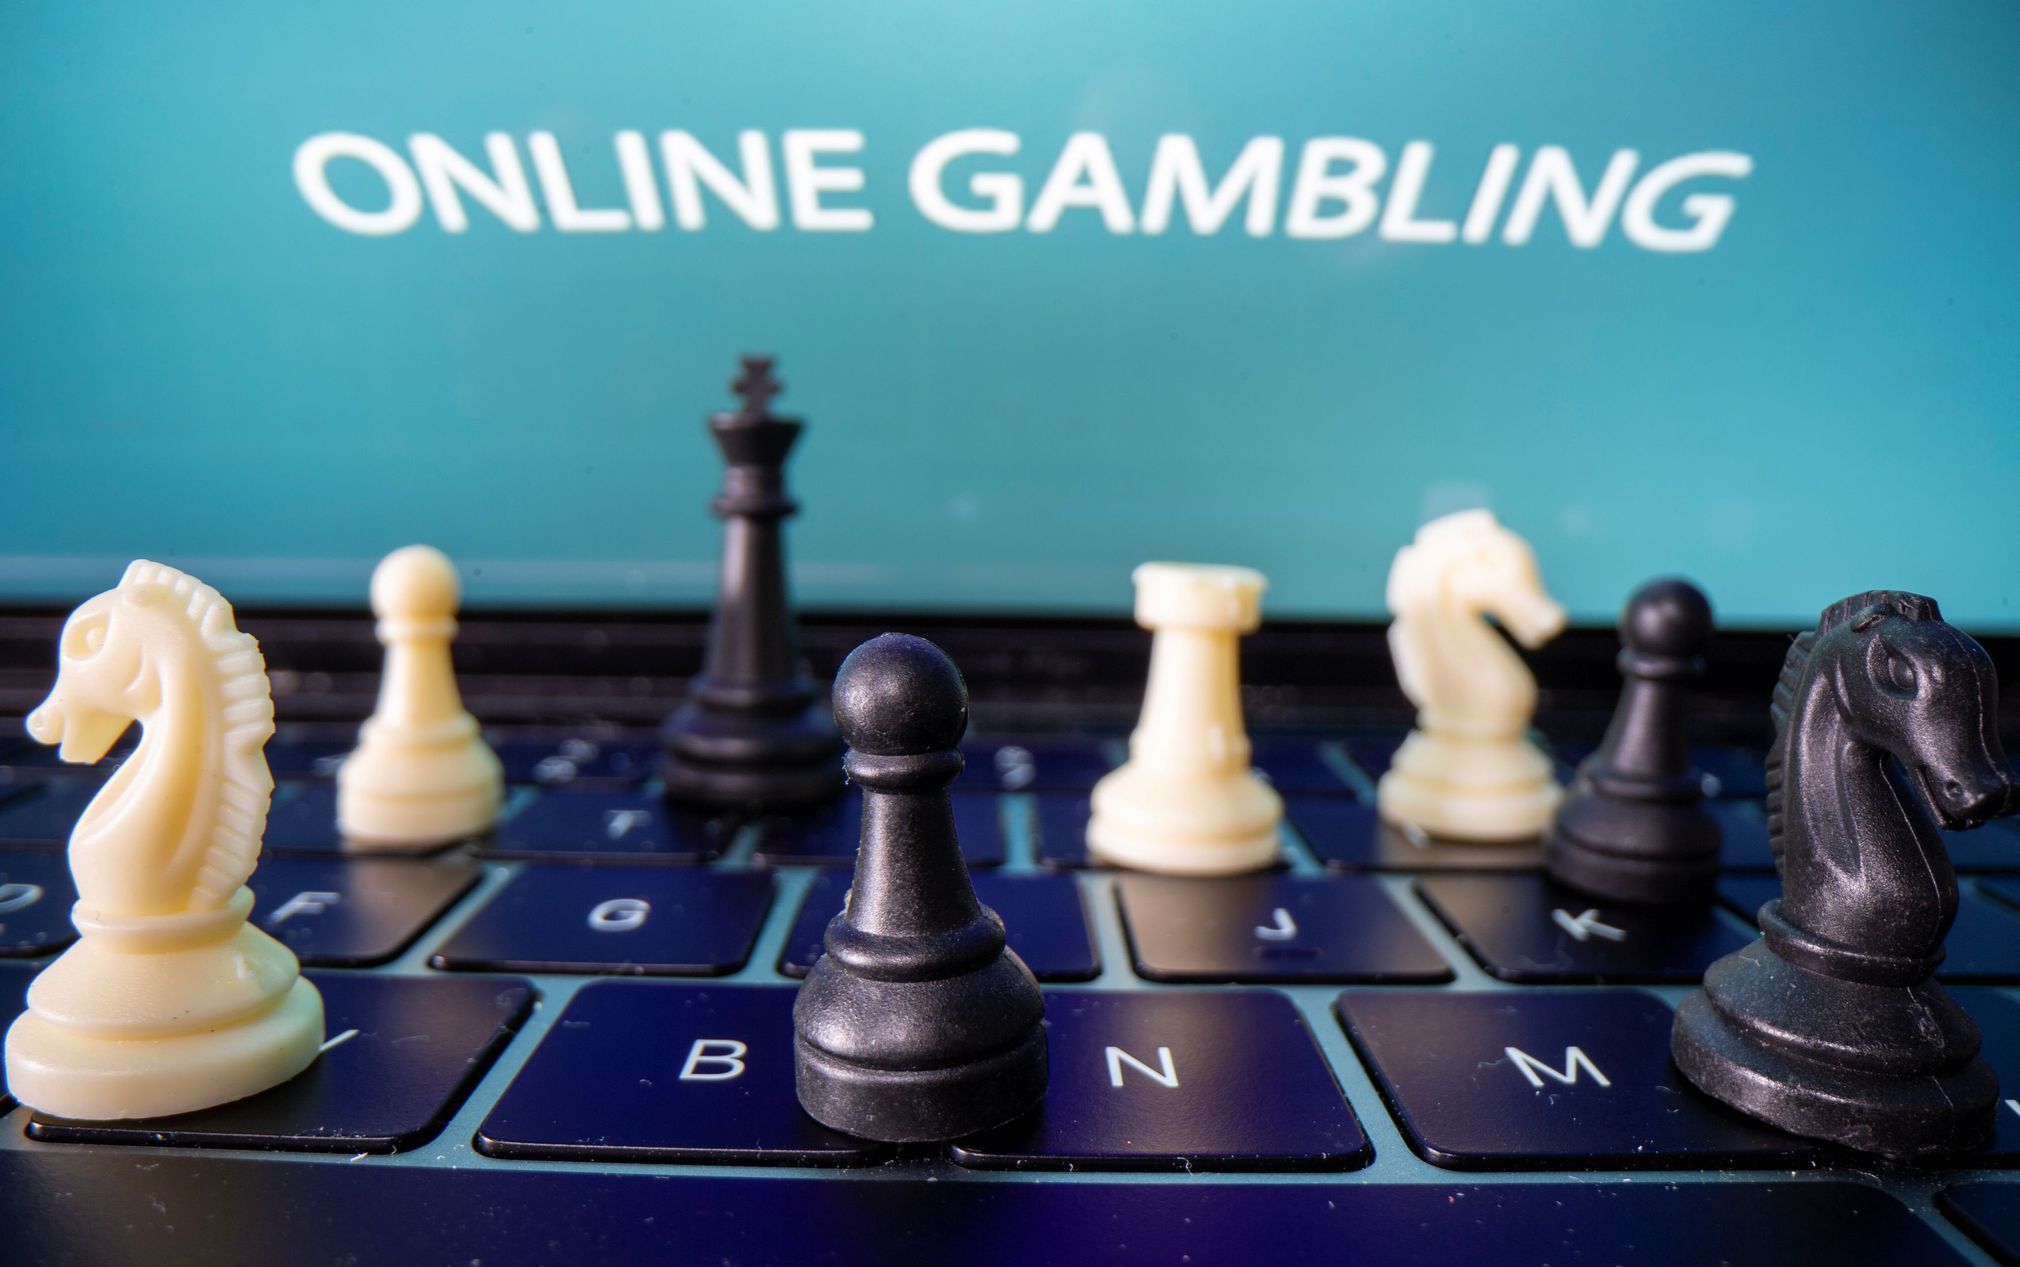 Chess are placed on the keyboard in front of displayed "Online Gambling" words in this illustration picture